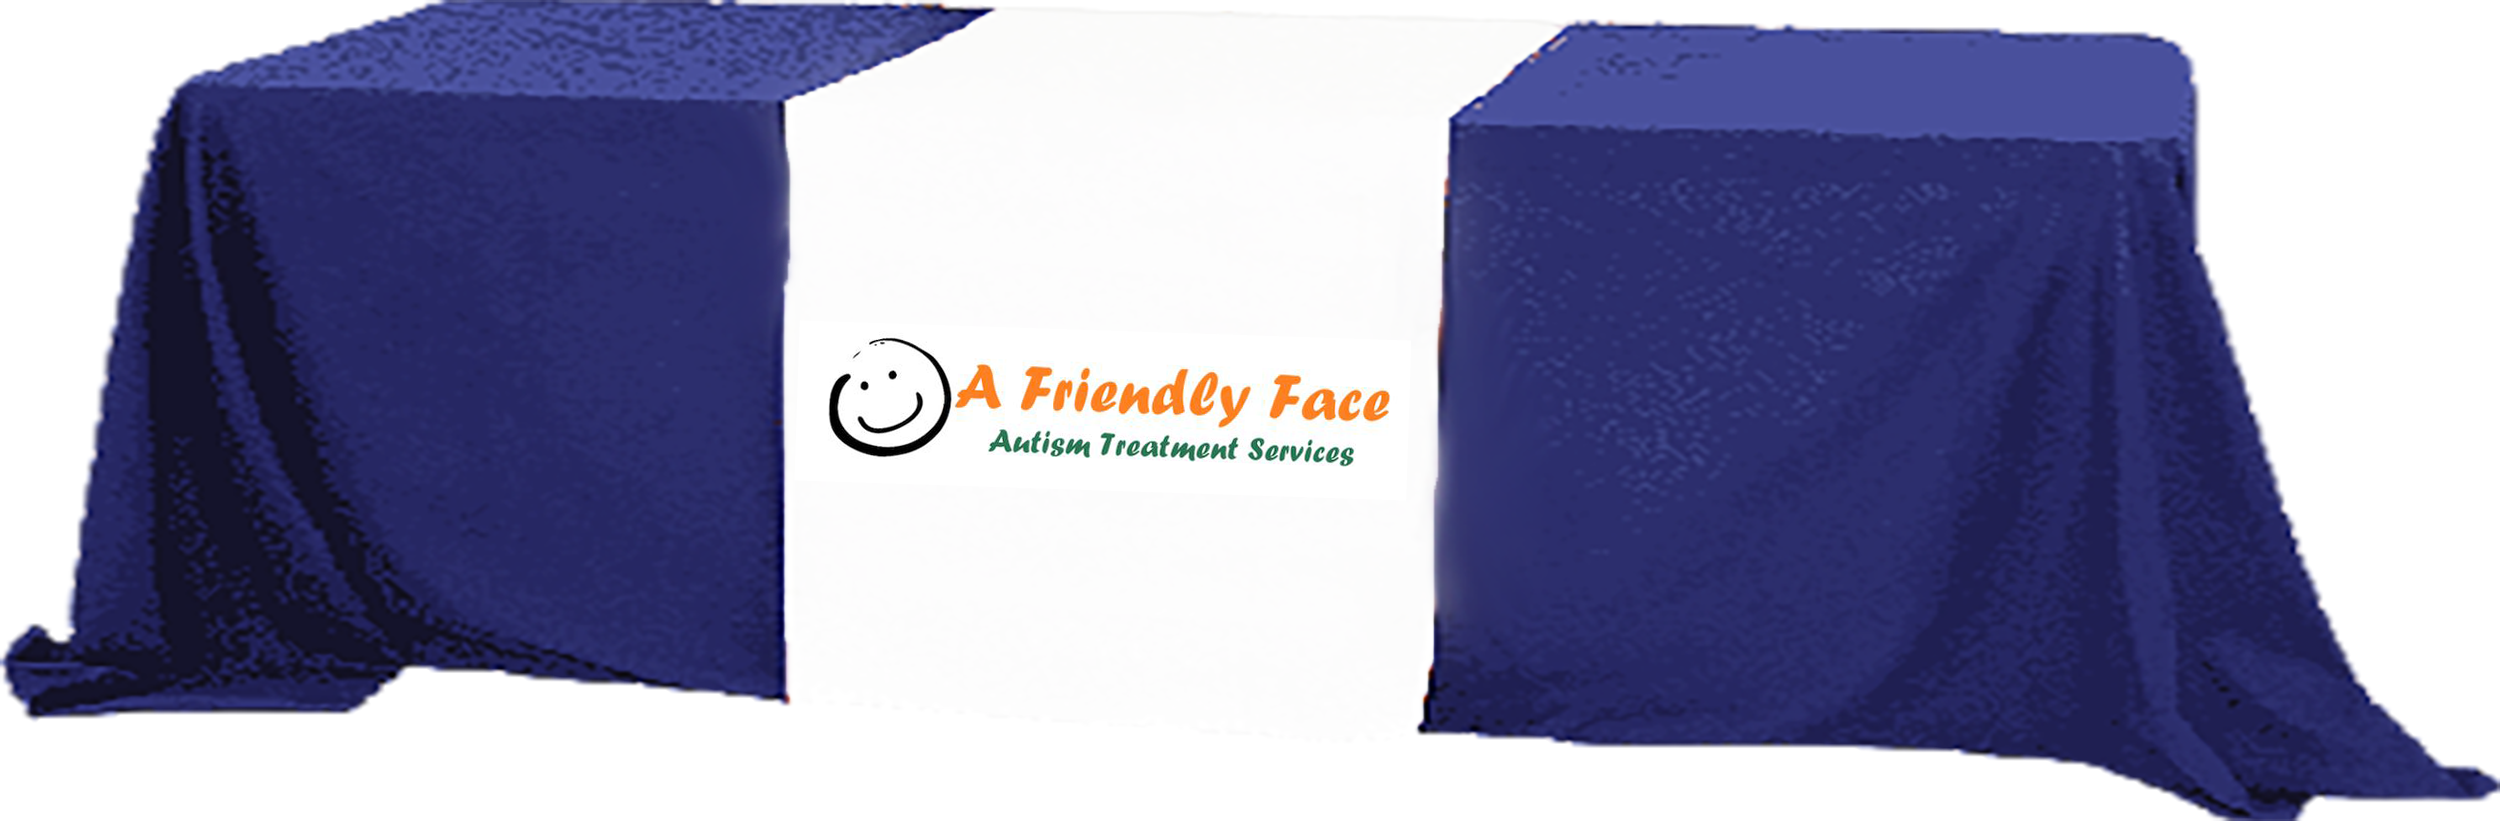 A Friendly Face logo on a table cover over a table image